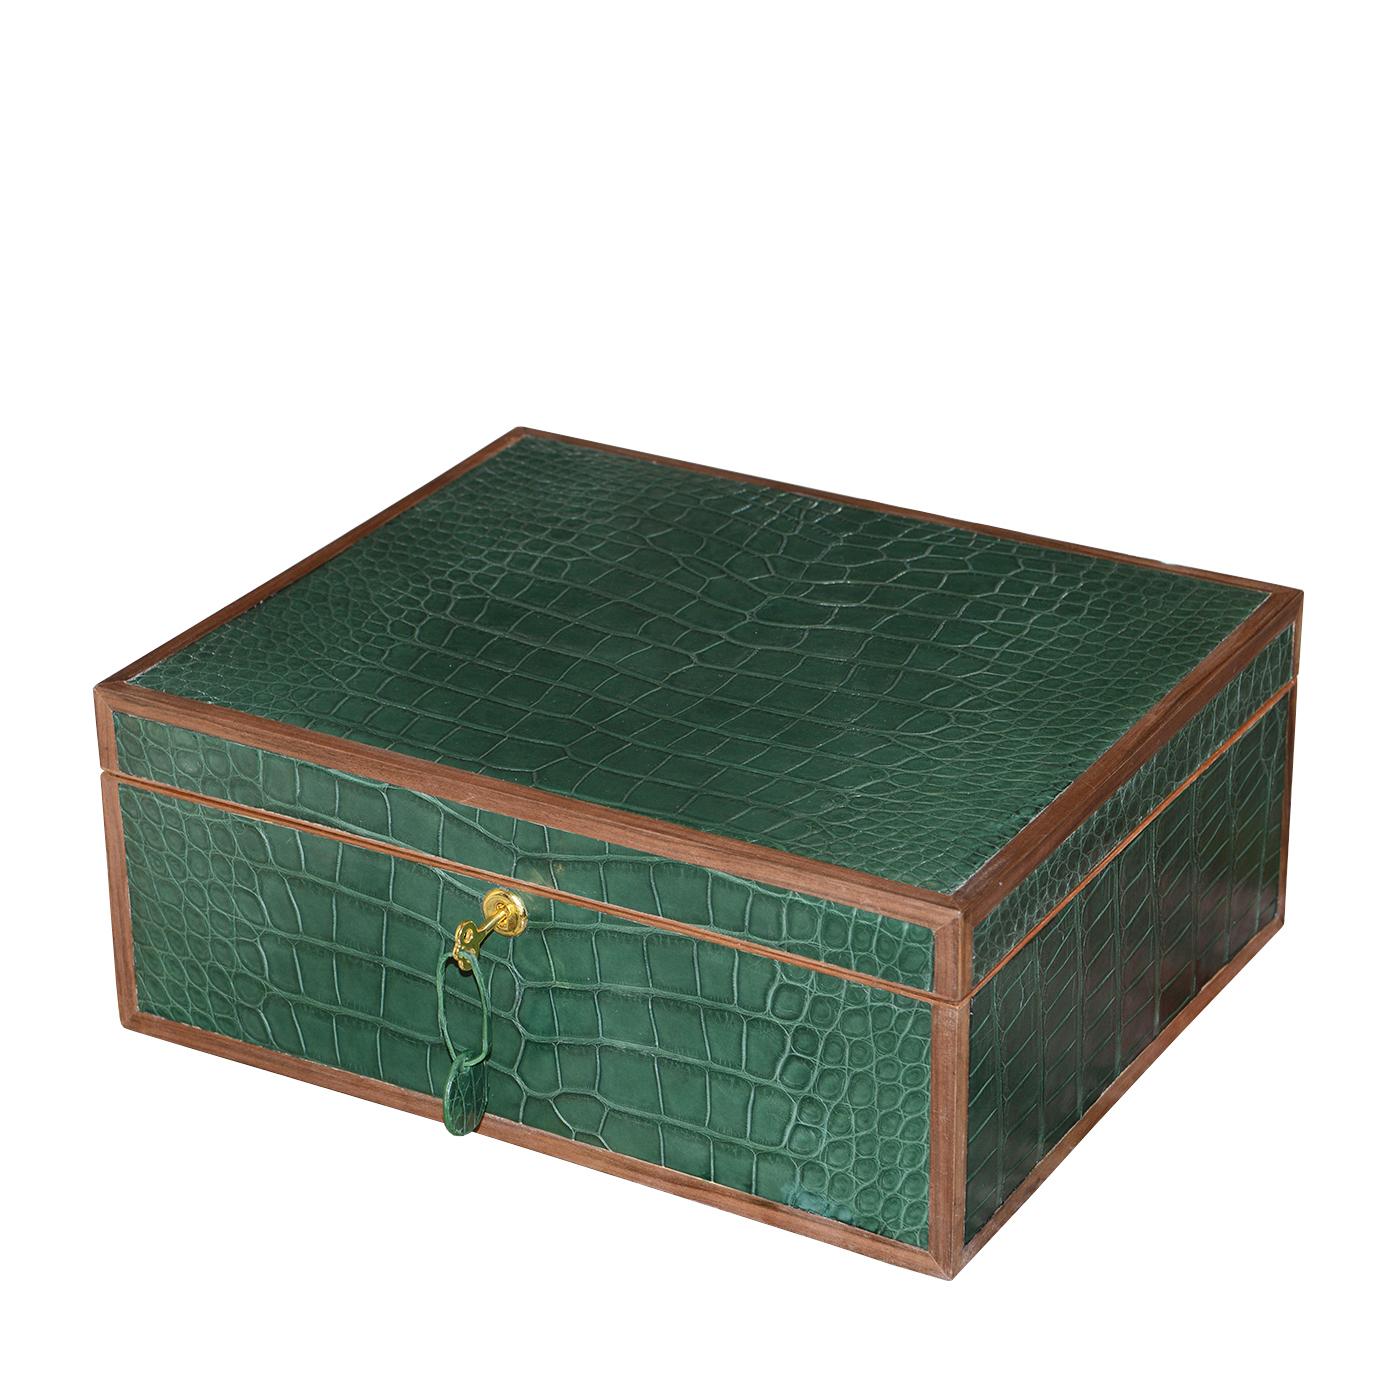 Cigar Box Alligator Green with all structure in solid
cedar wood, box covered with alligator skin stained
in Gucci green finish. hardware and key in solid brass
in polished finish. Including a humidor and 1 platter in
solid cedar wood.